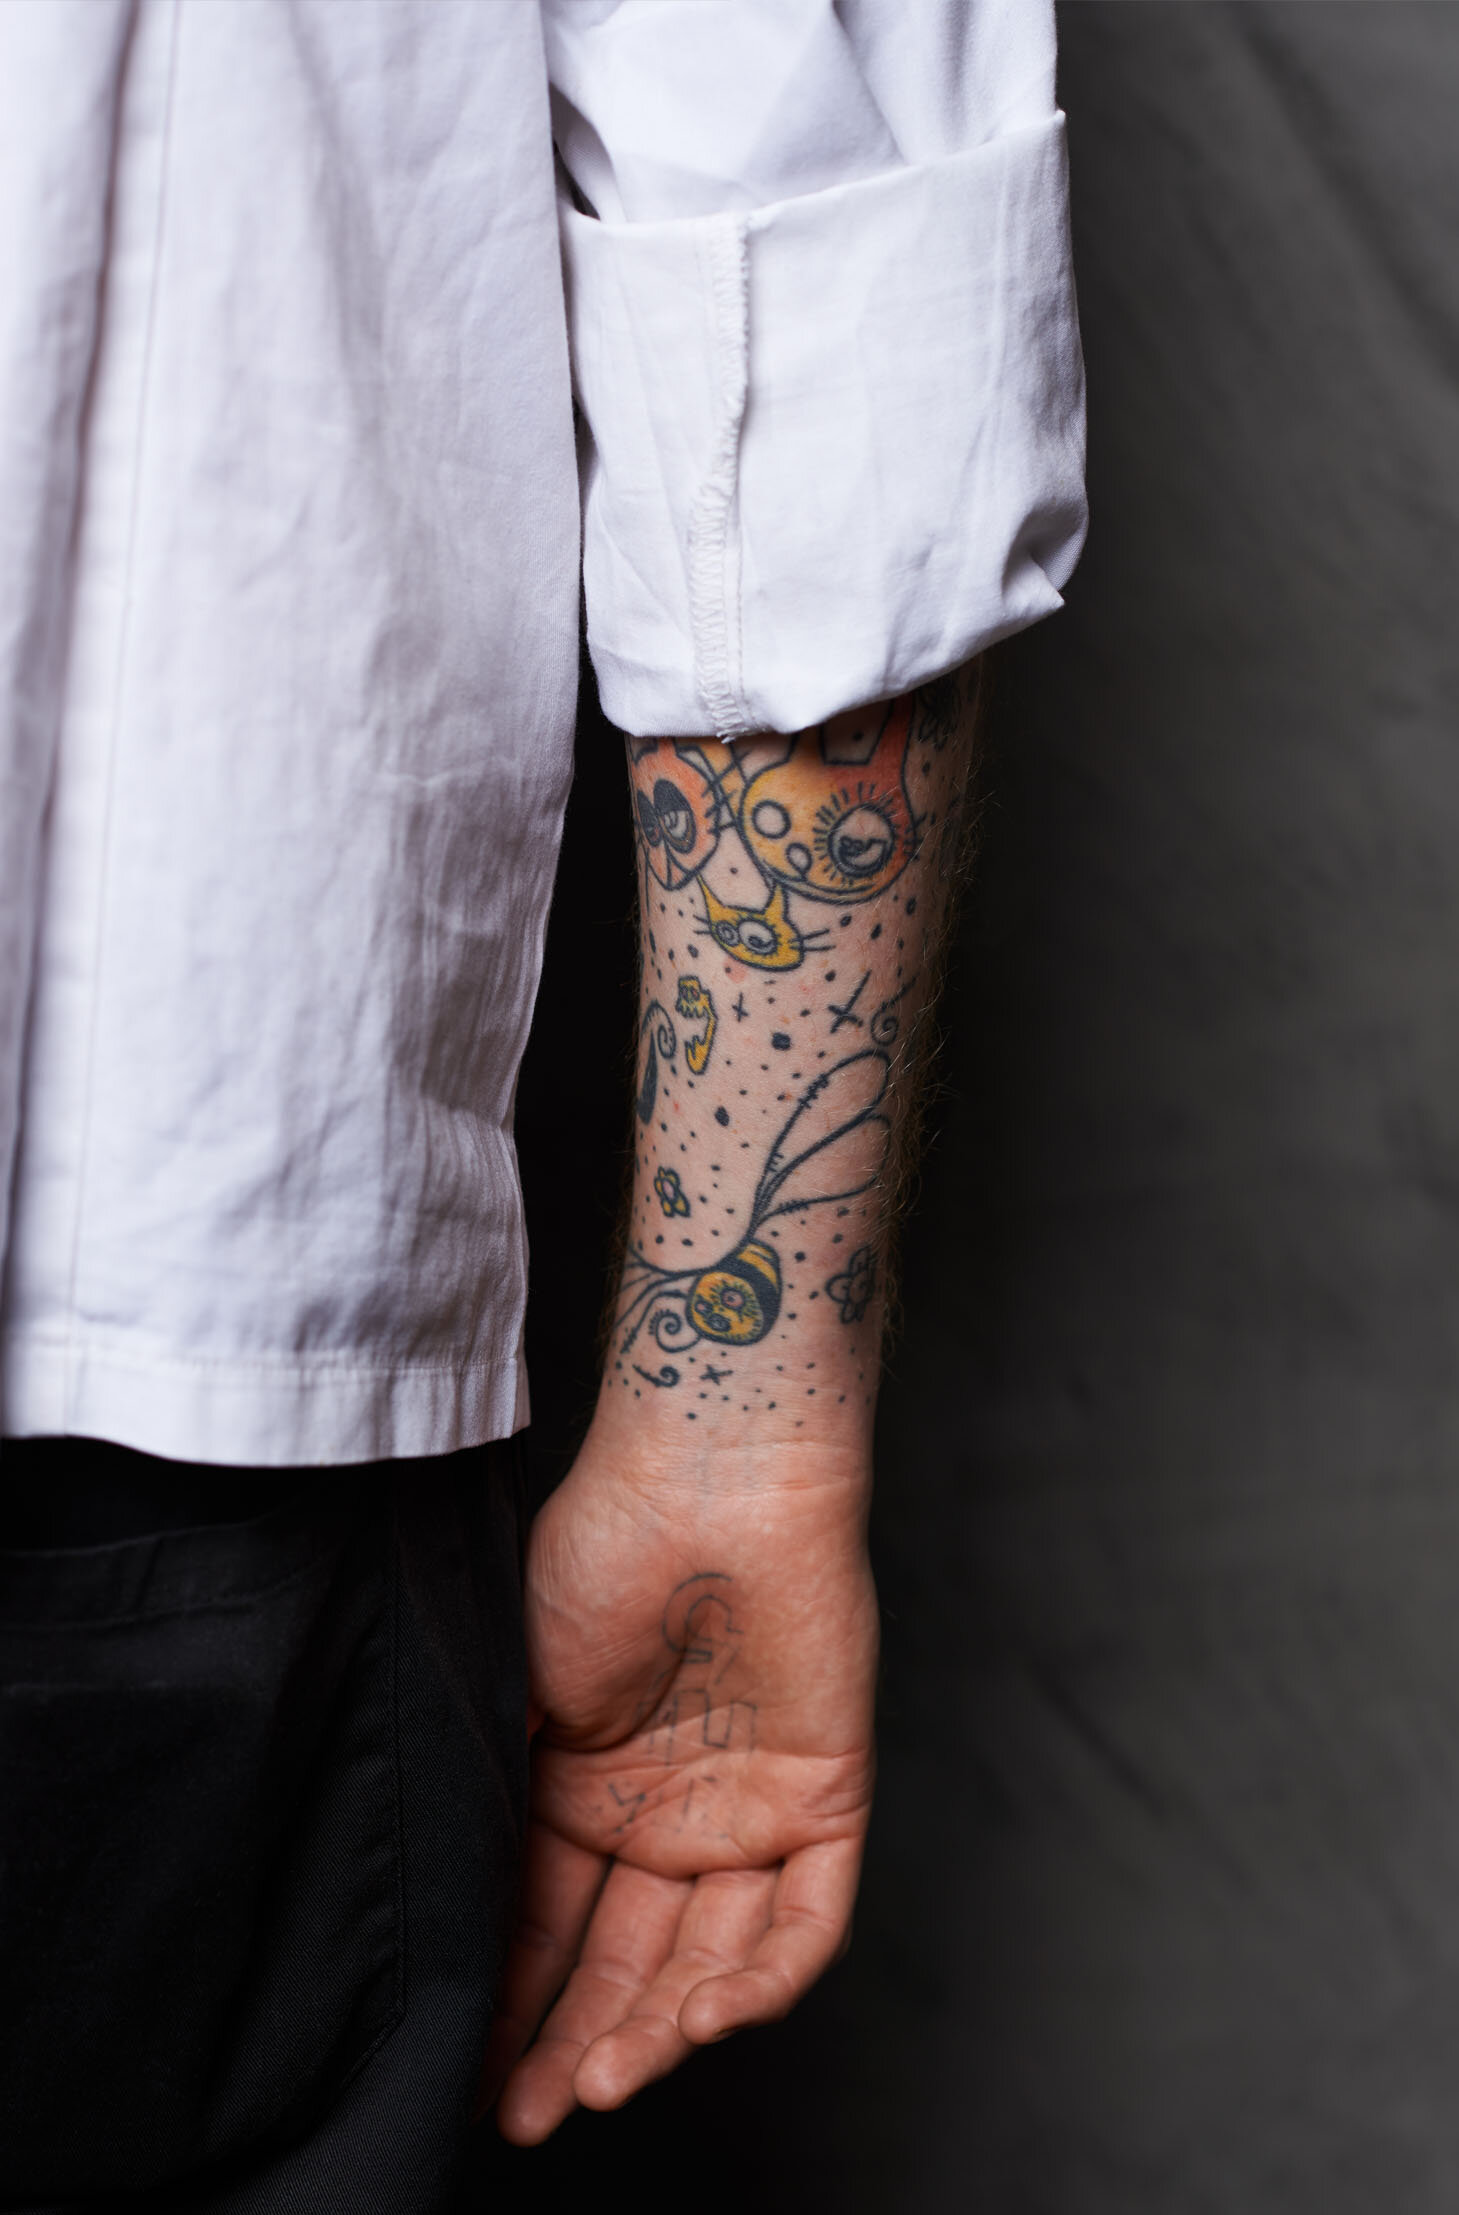 Tattooed chef shot by advertising photographer Holly Pickering